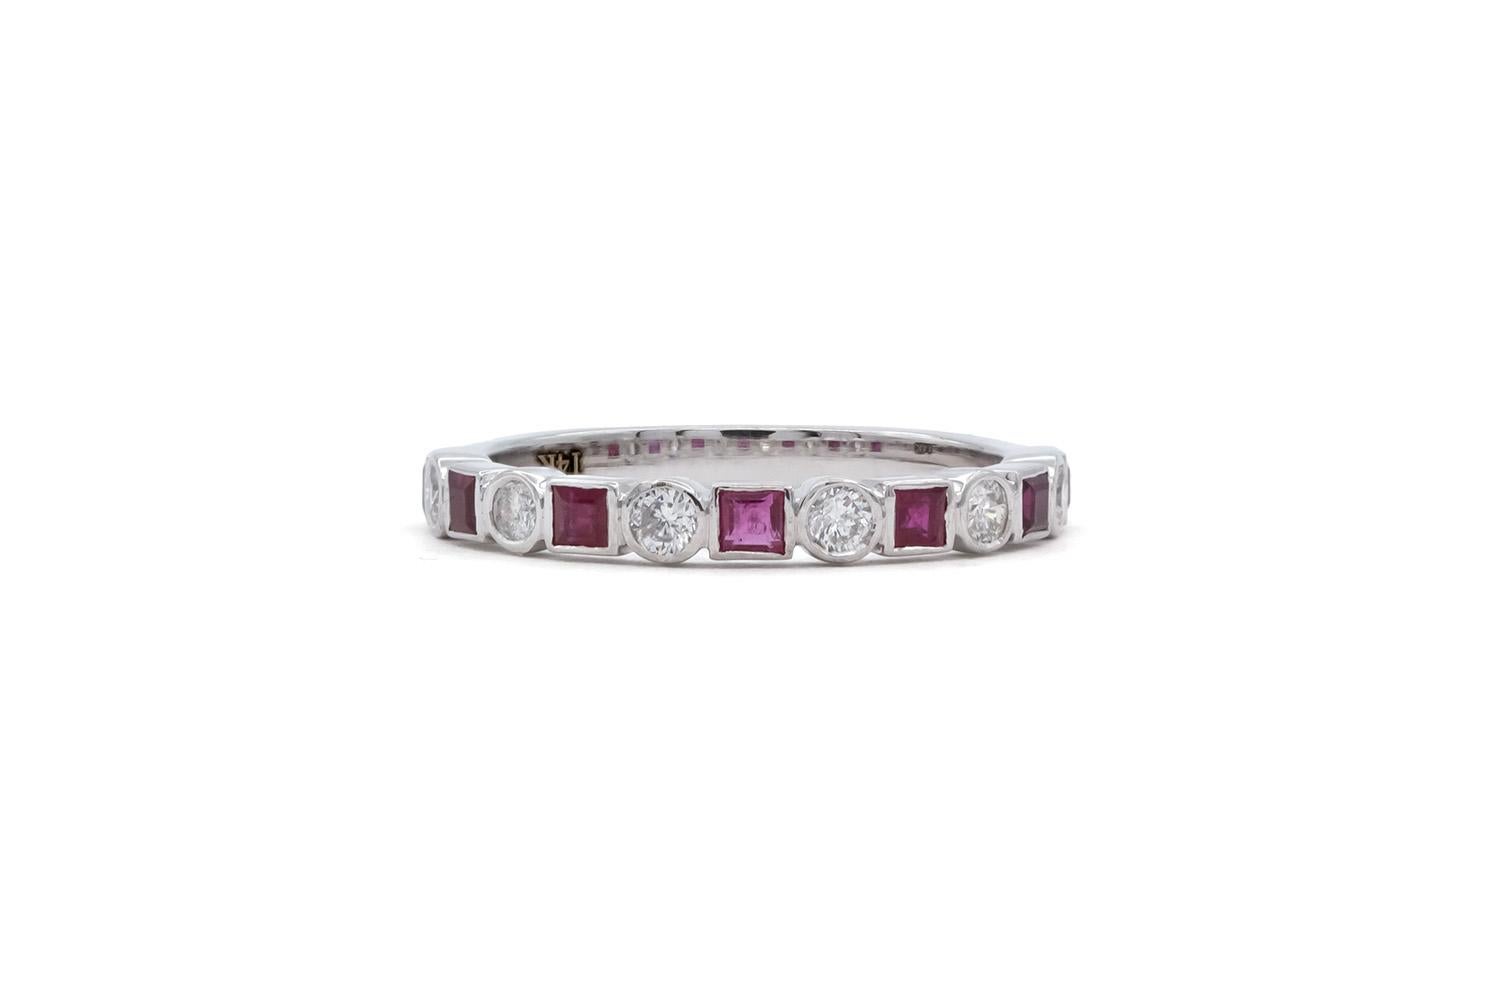 We are pleased to offer this 14k White Gold Ruby & Diamond Fashion Stacking Ring. This stunning ring feature 0.53ctw natural princess cut rubies accented by 0.24ctw H-I/SI1-SI2 round brilliant cut diamonds all bezel set in a 14k white gold mounting.